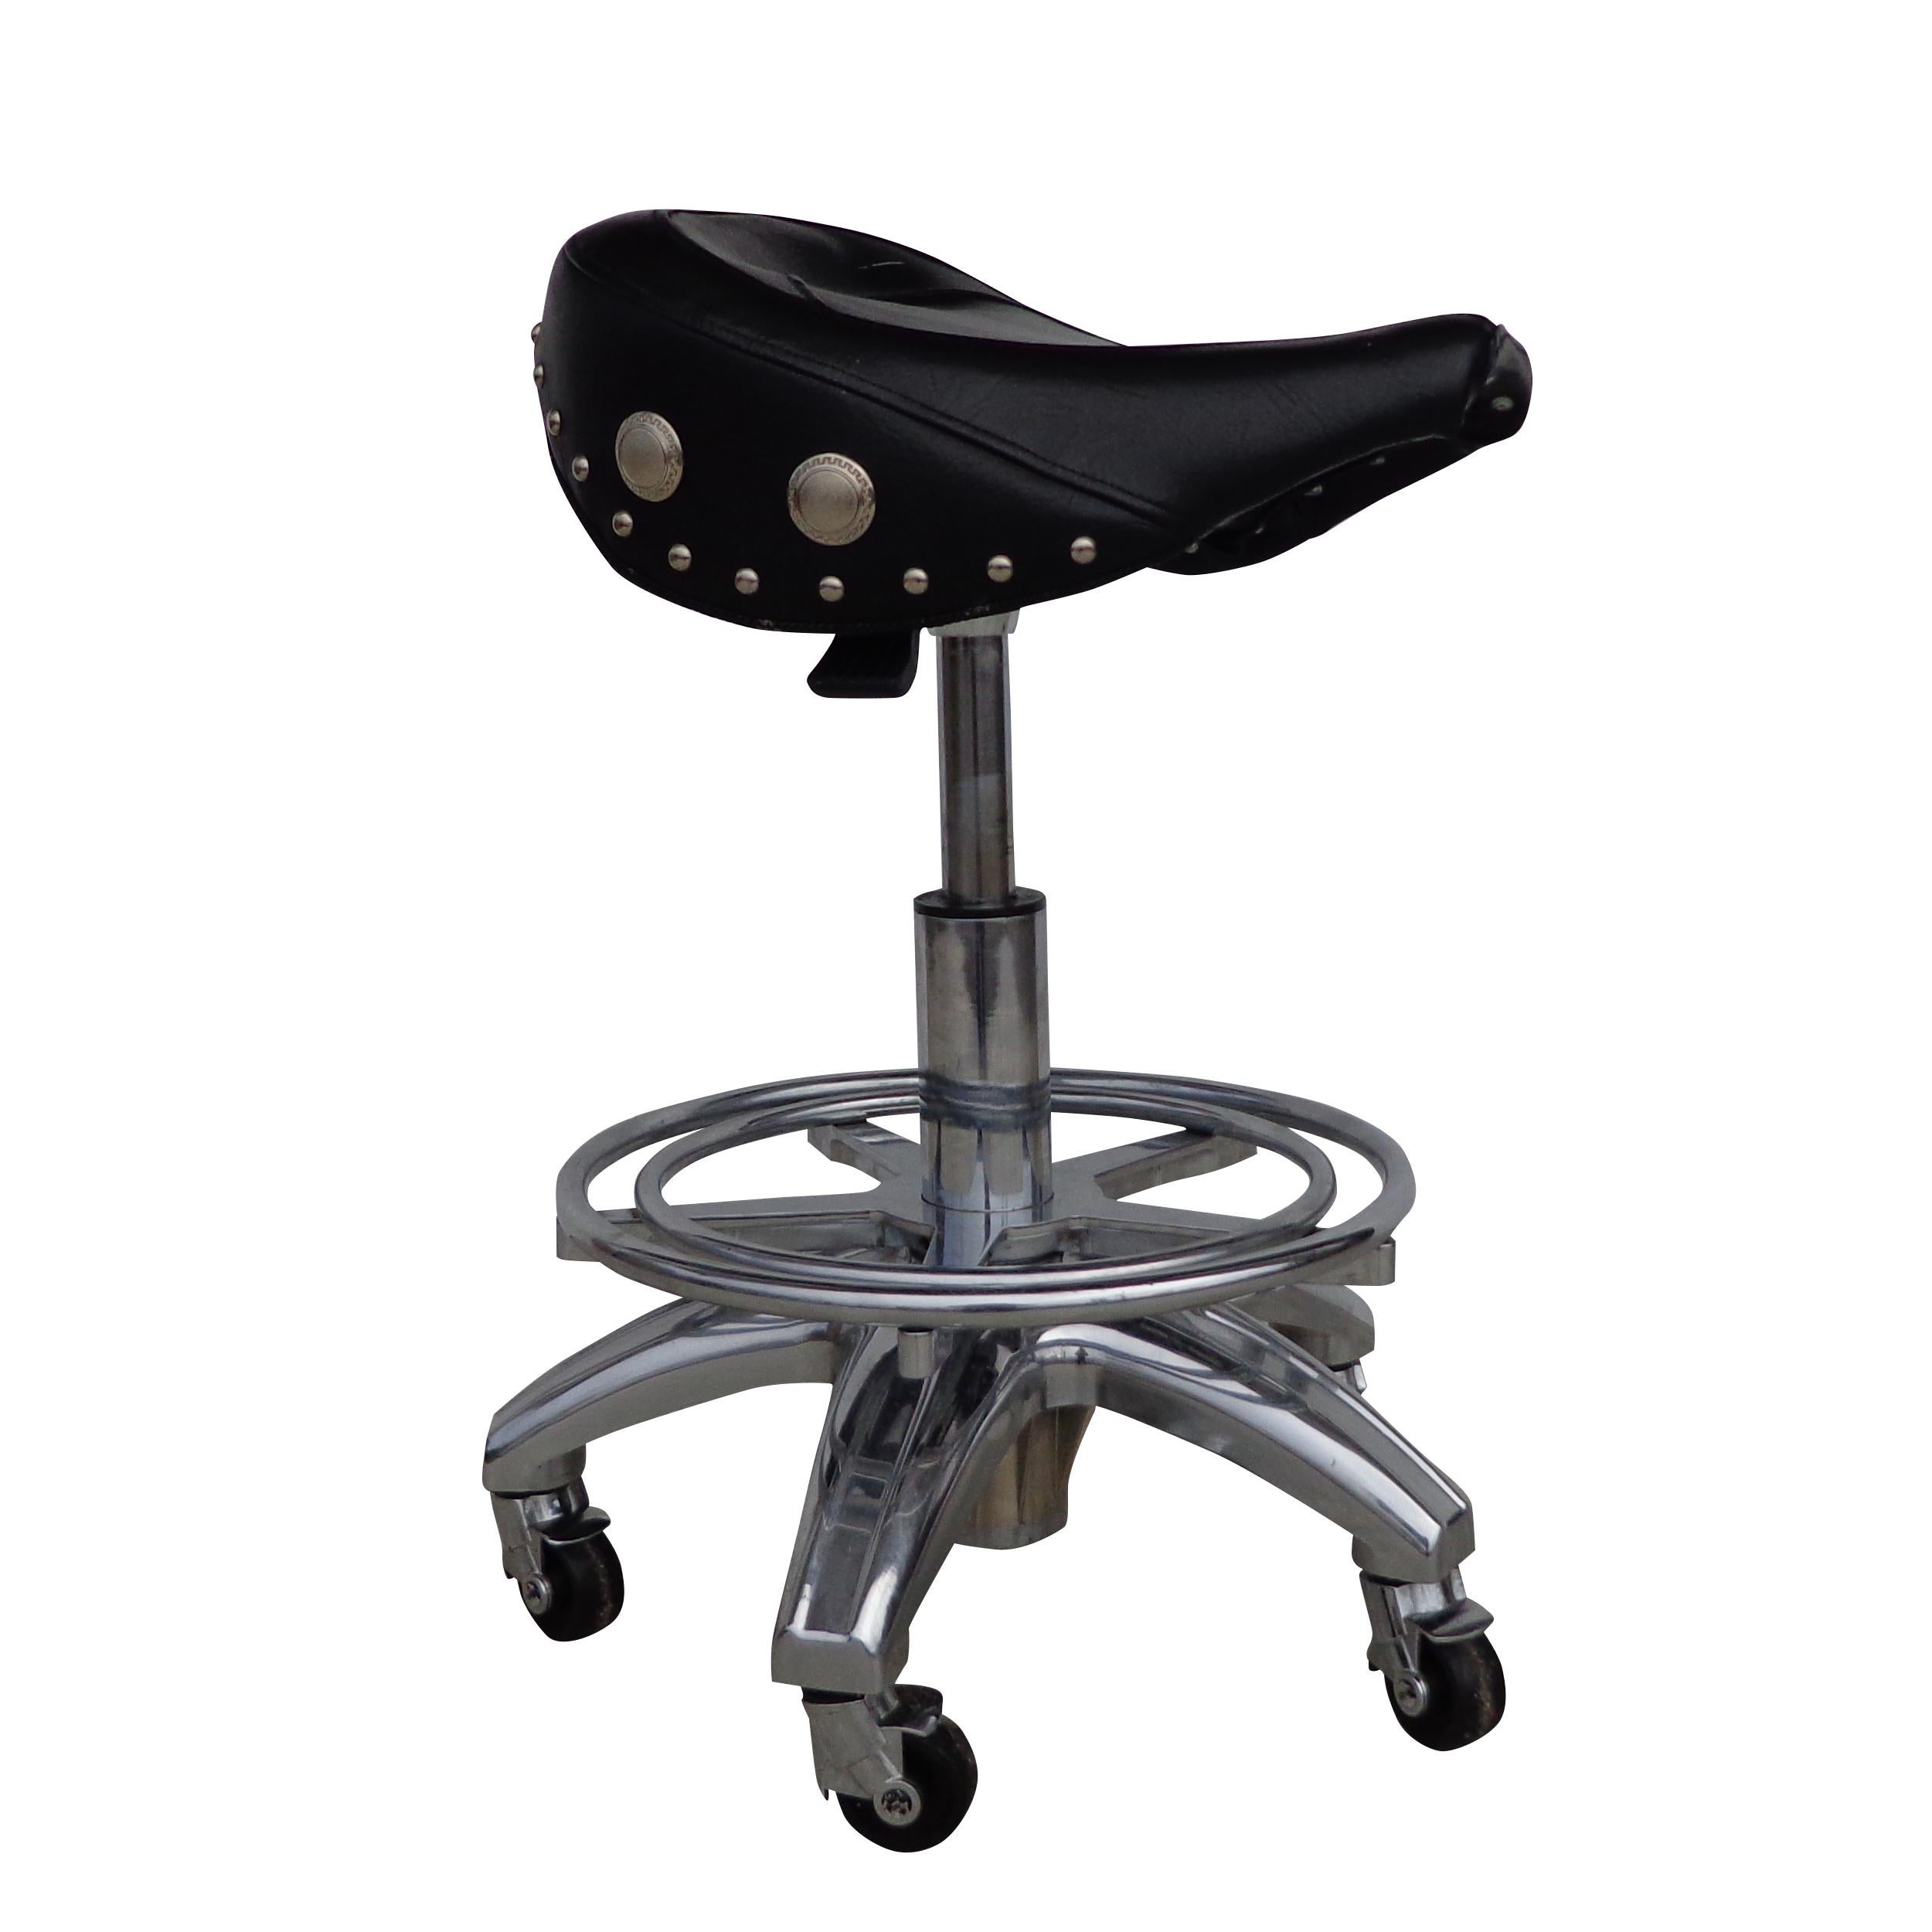 Larin Leather Saddle & Chrome Bar Stool In Good Condition For Sale In Pasadena, TX